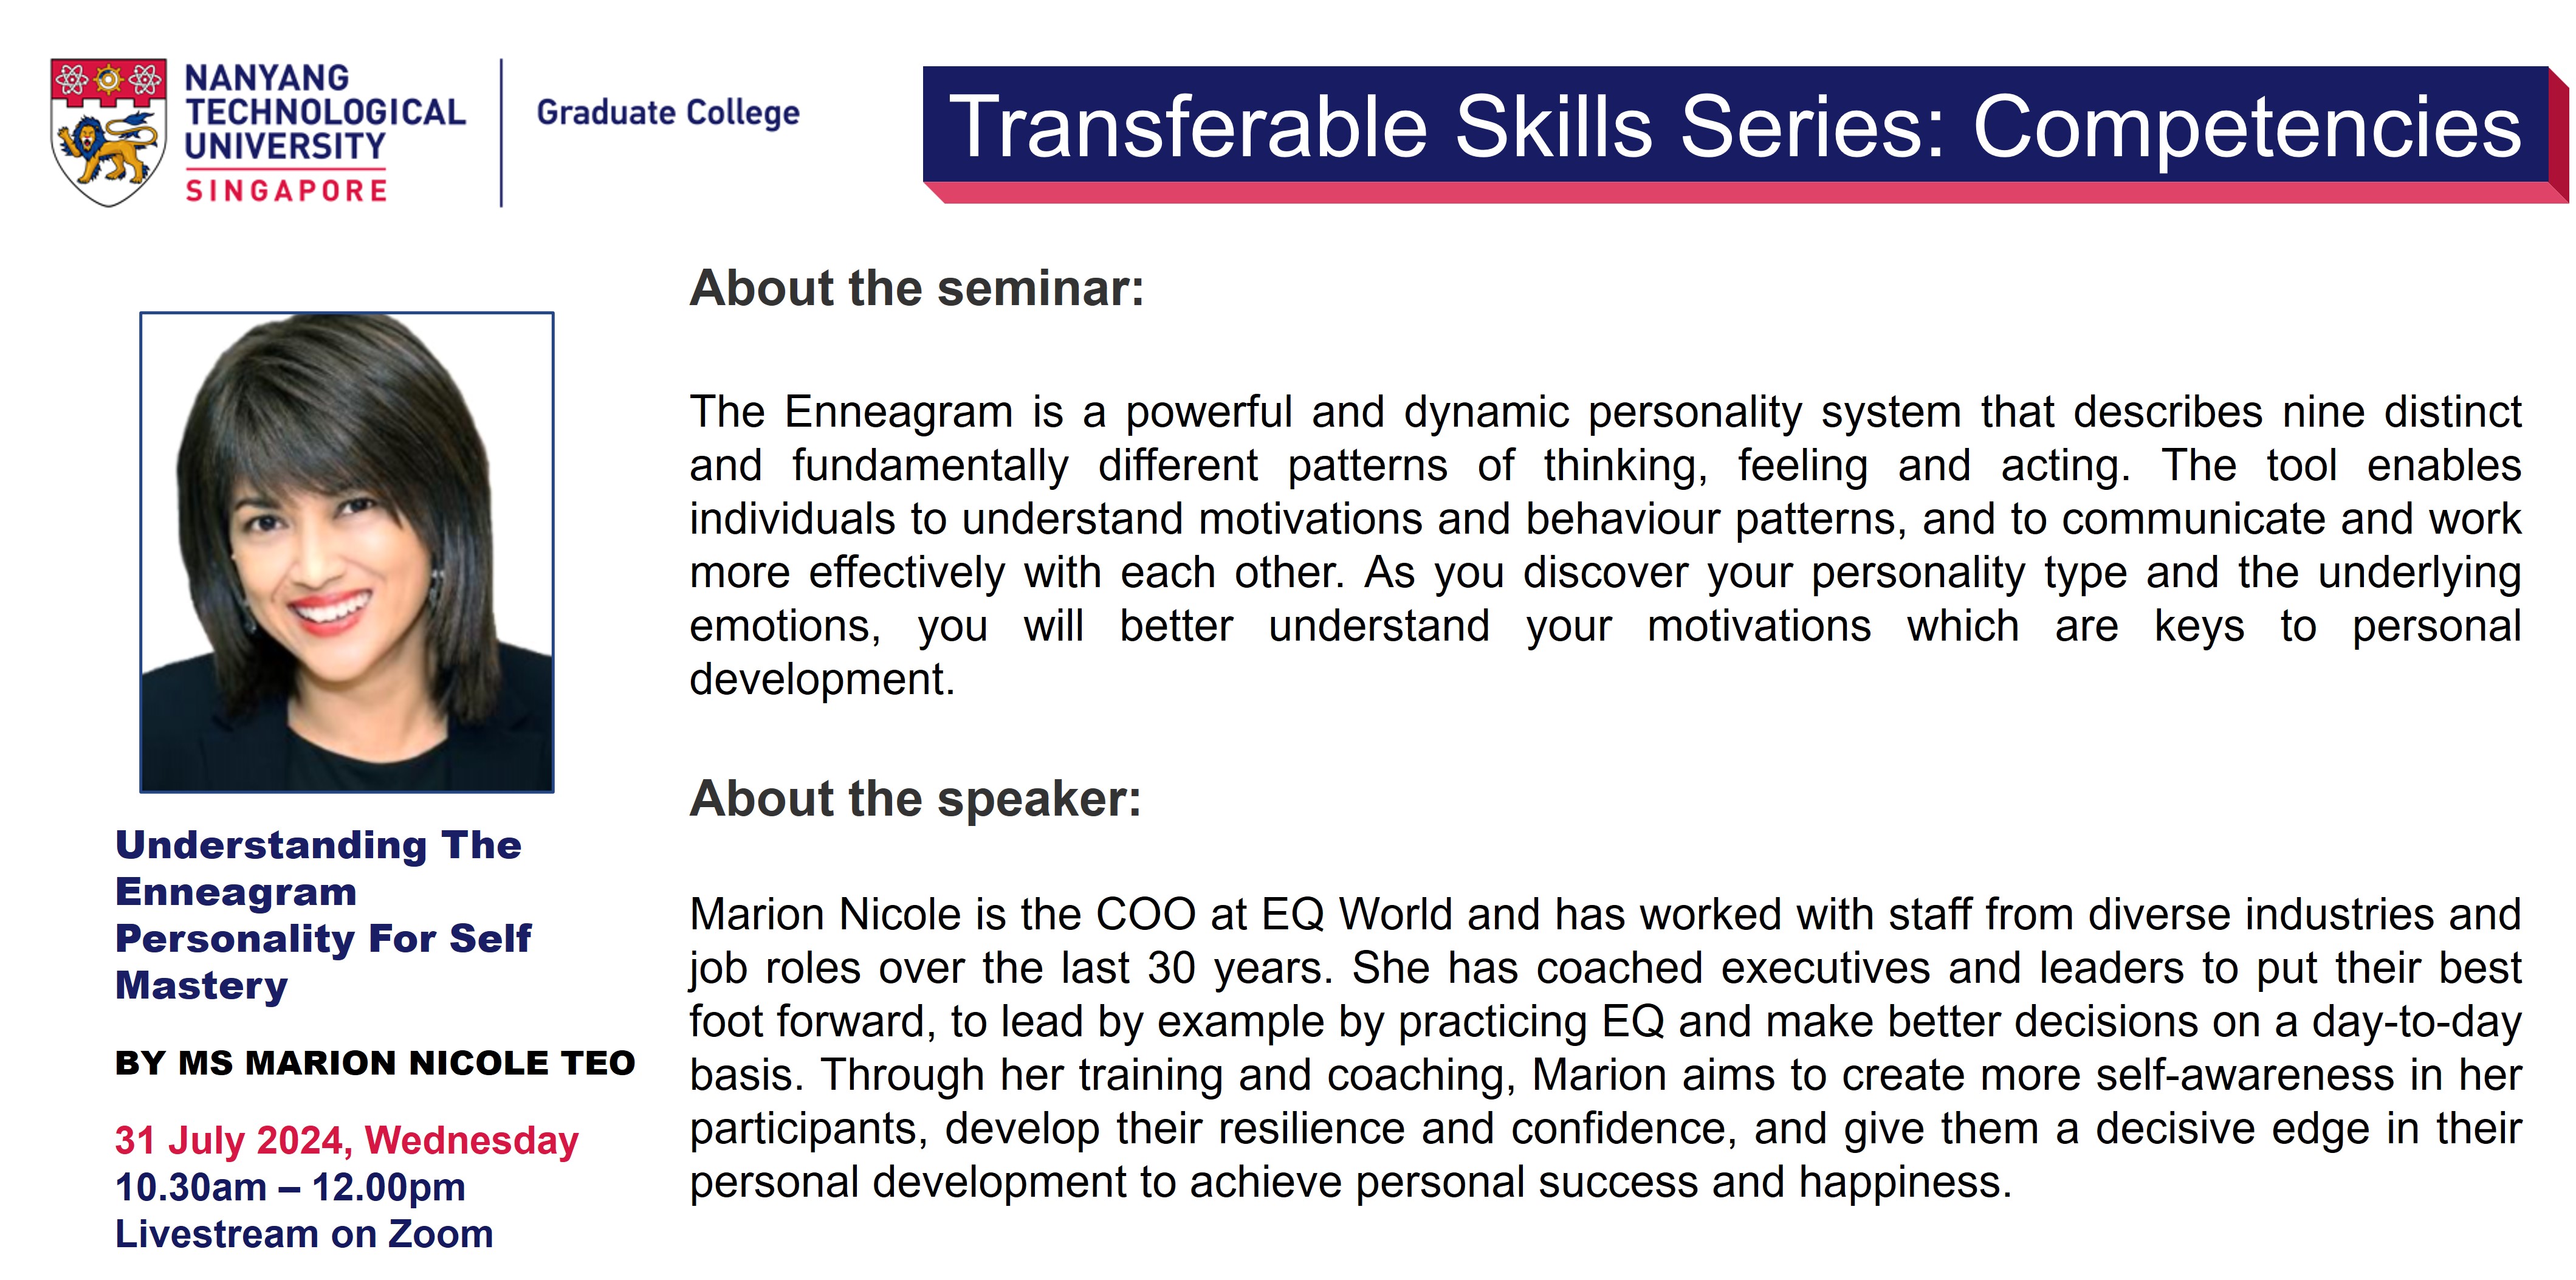 31 Jul - Understanding The Enneagram Personality For Self Mastery